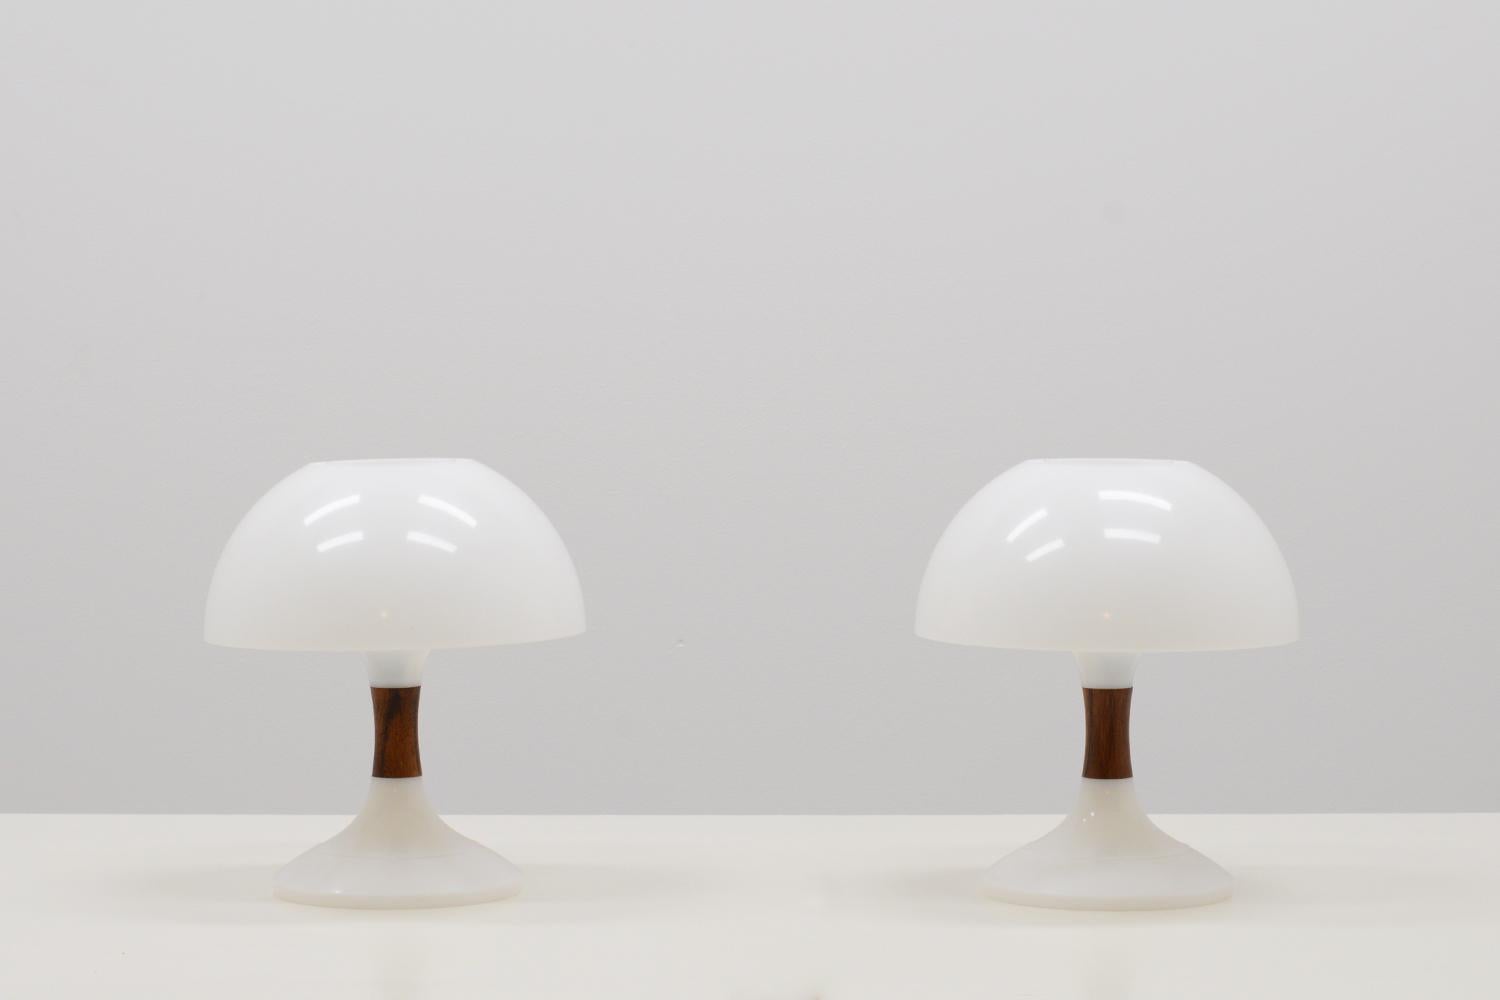 Set of 2 rare “Karina” table lamps by Bent Karlby for ASK Belysninger 1971. Typical space age design. Made of acrylic and rosewood in the middle. In very good vintage condition. Price for the set of 2.